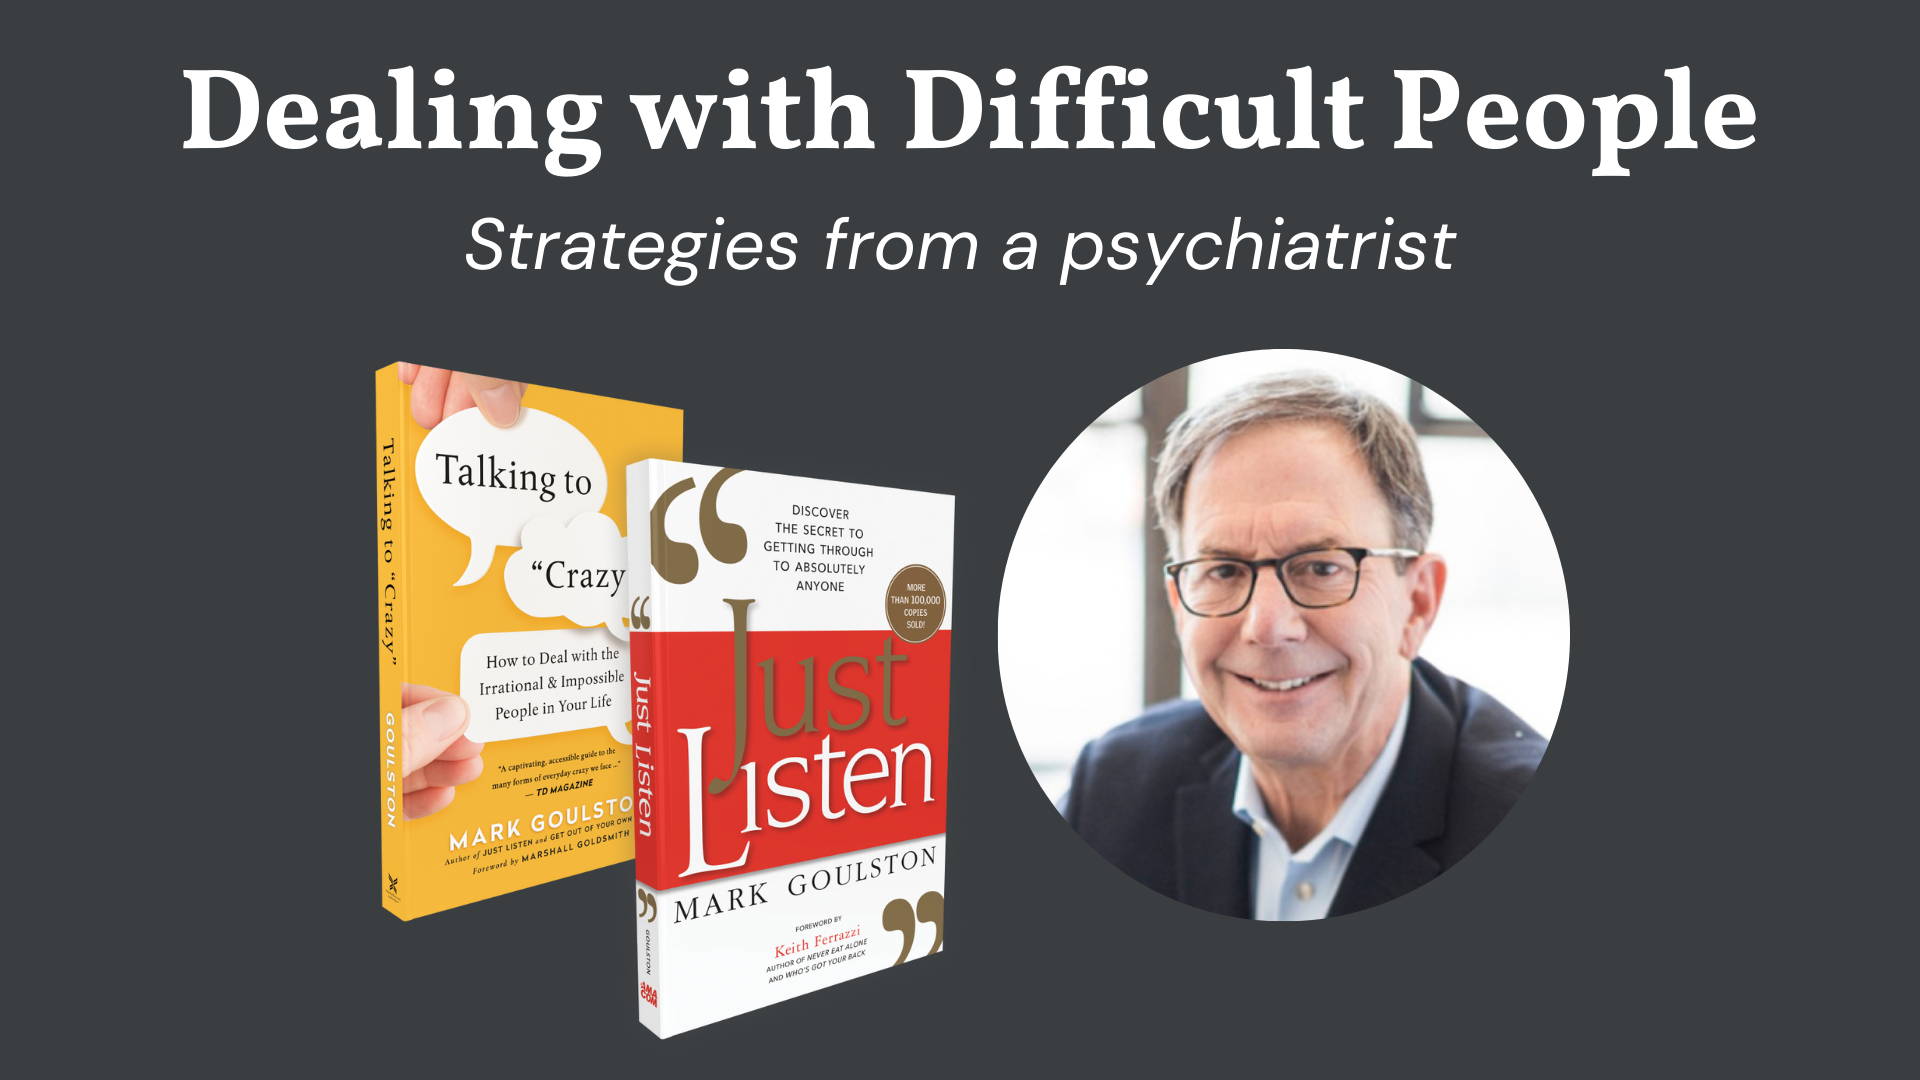 strategies from psychiatrist Mark Goulston for dealing with difficult people